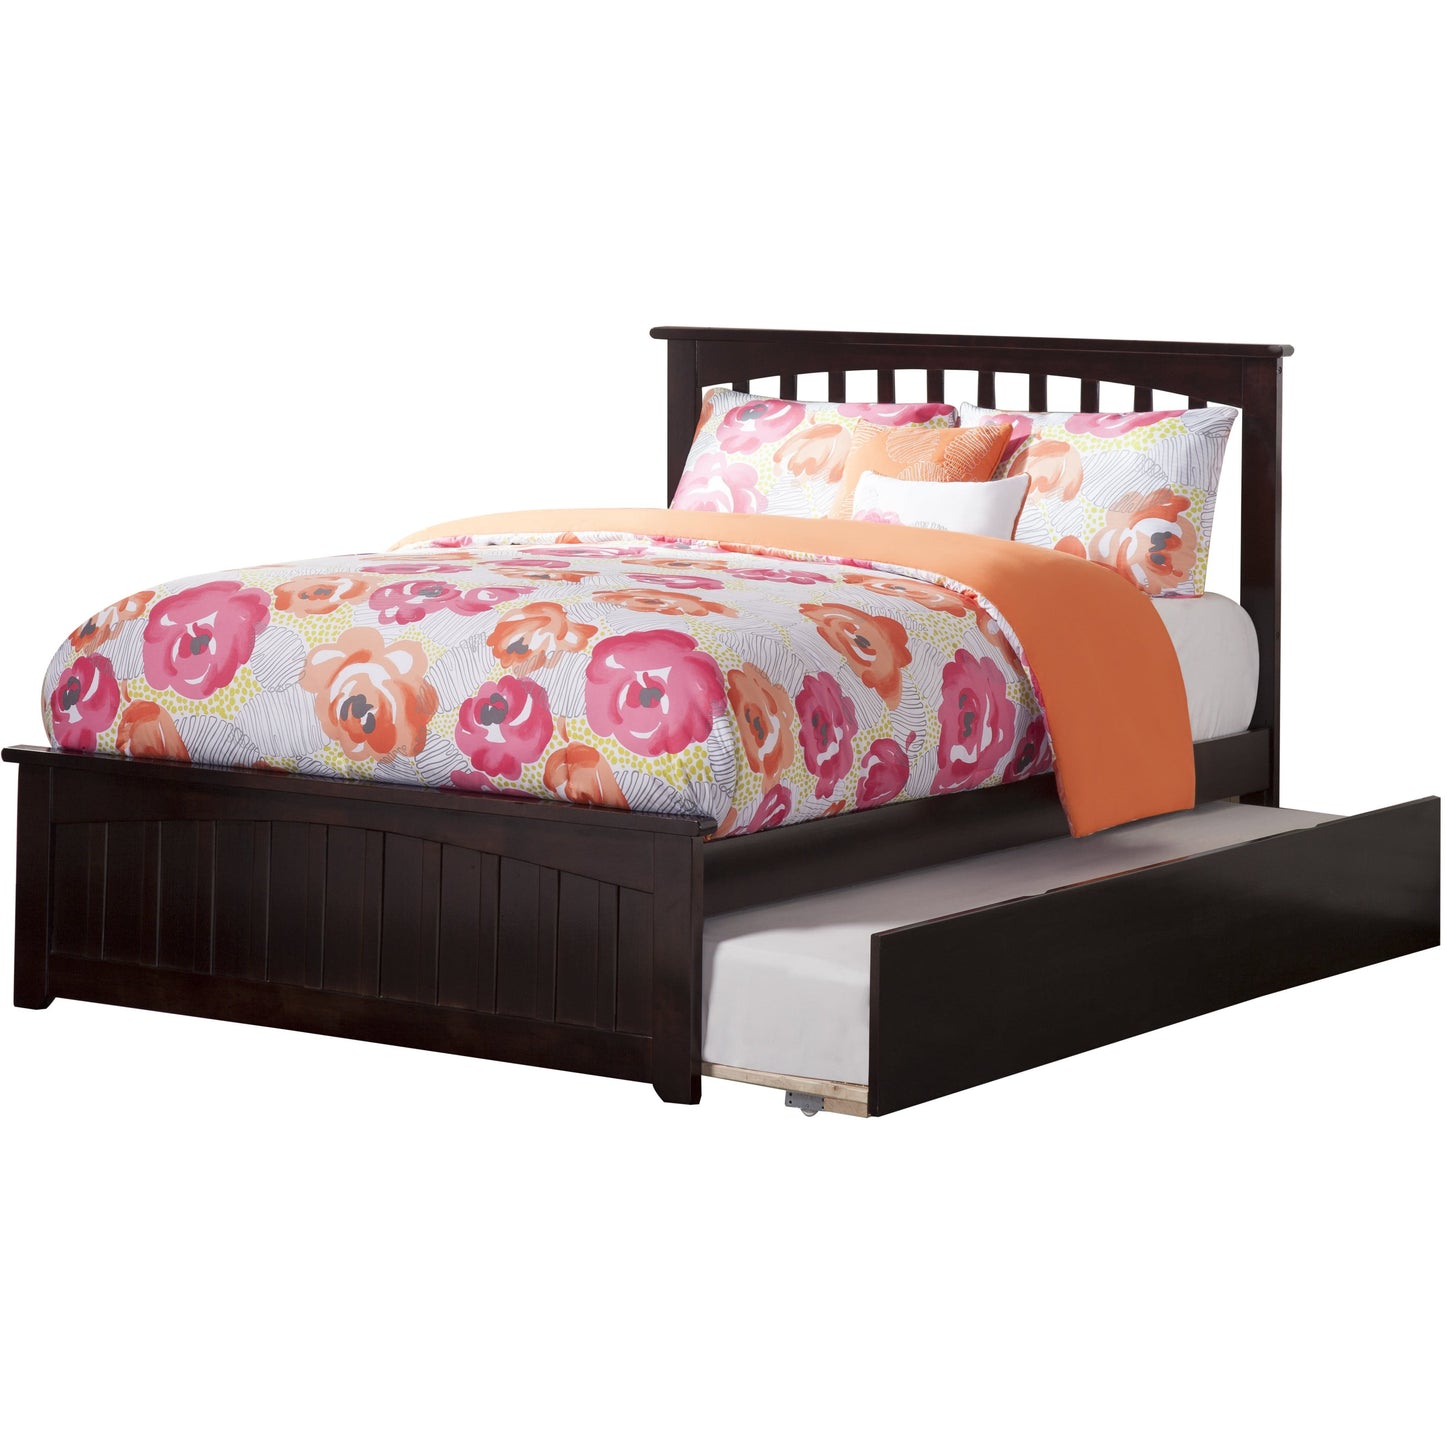 Atlantic Furniture Bed Mission Full Platform Bed with Matching Foot Board with Twin Size Urban Trundle Bed in Espresso